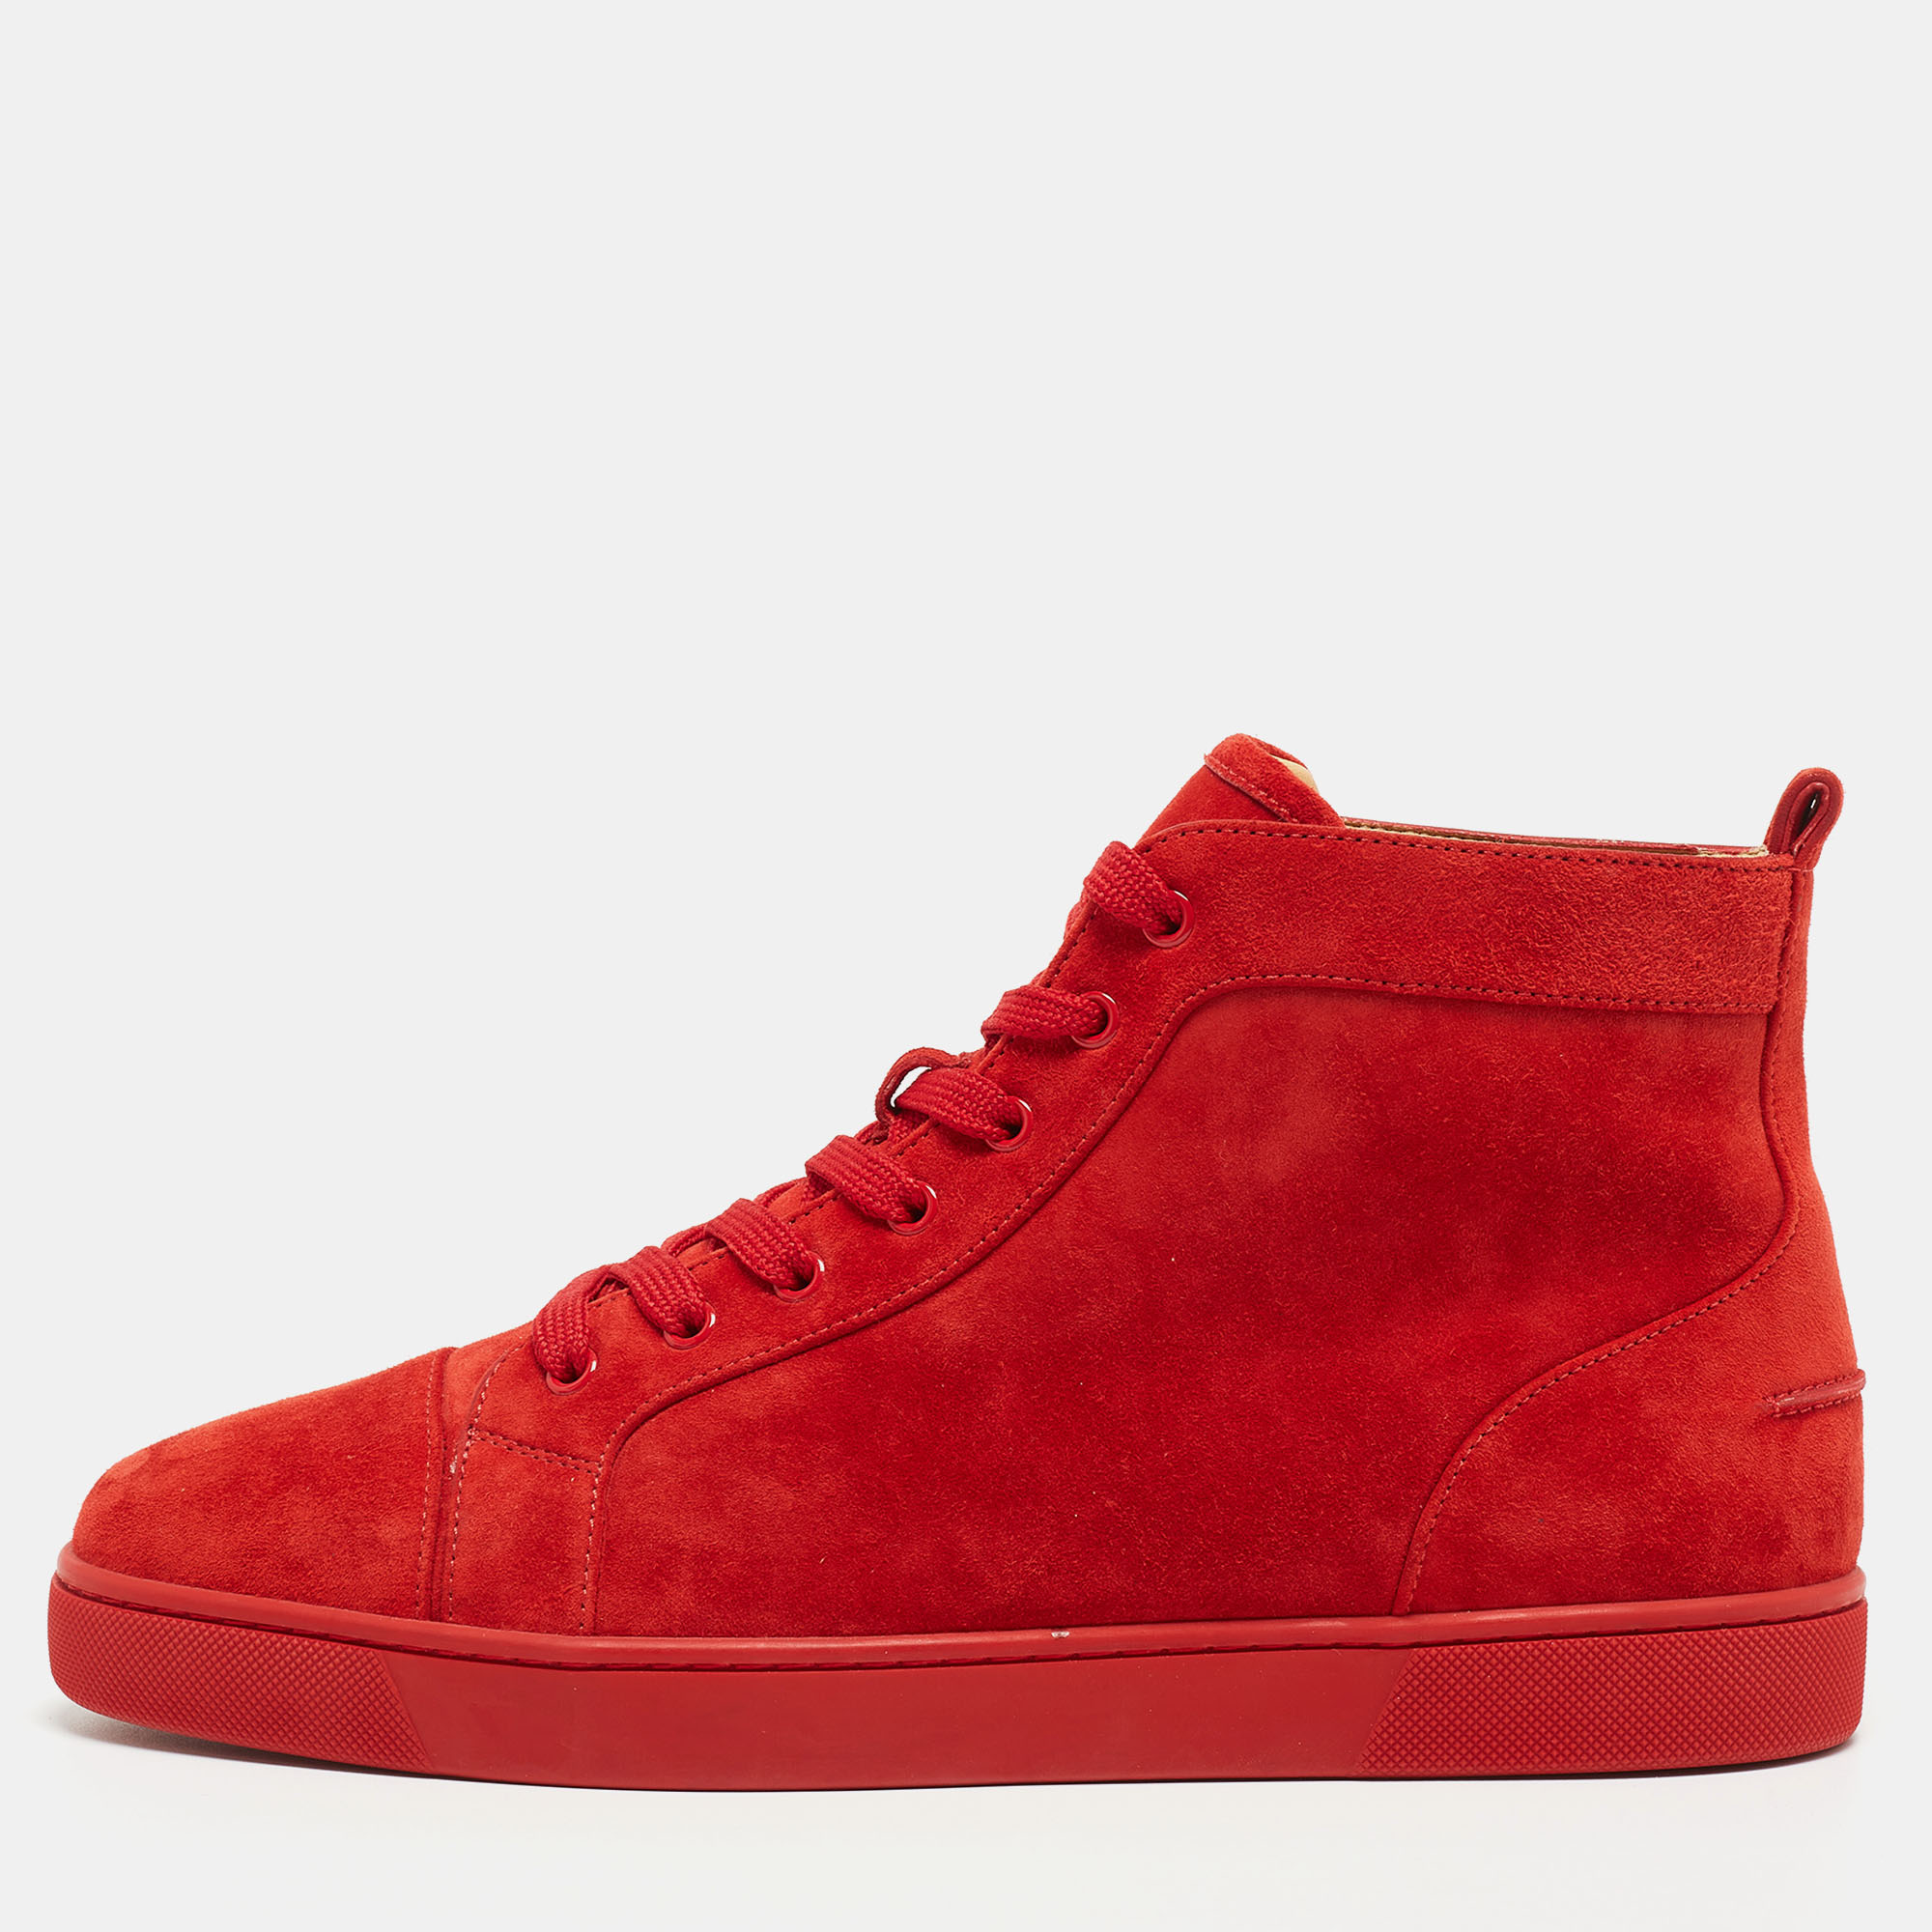 Christian Louboutin Mixkeoshell Metallic High-top Leather Trainers for Men